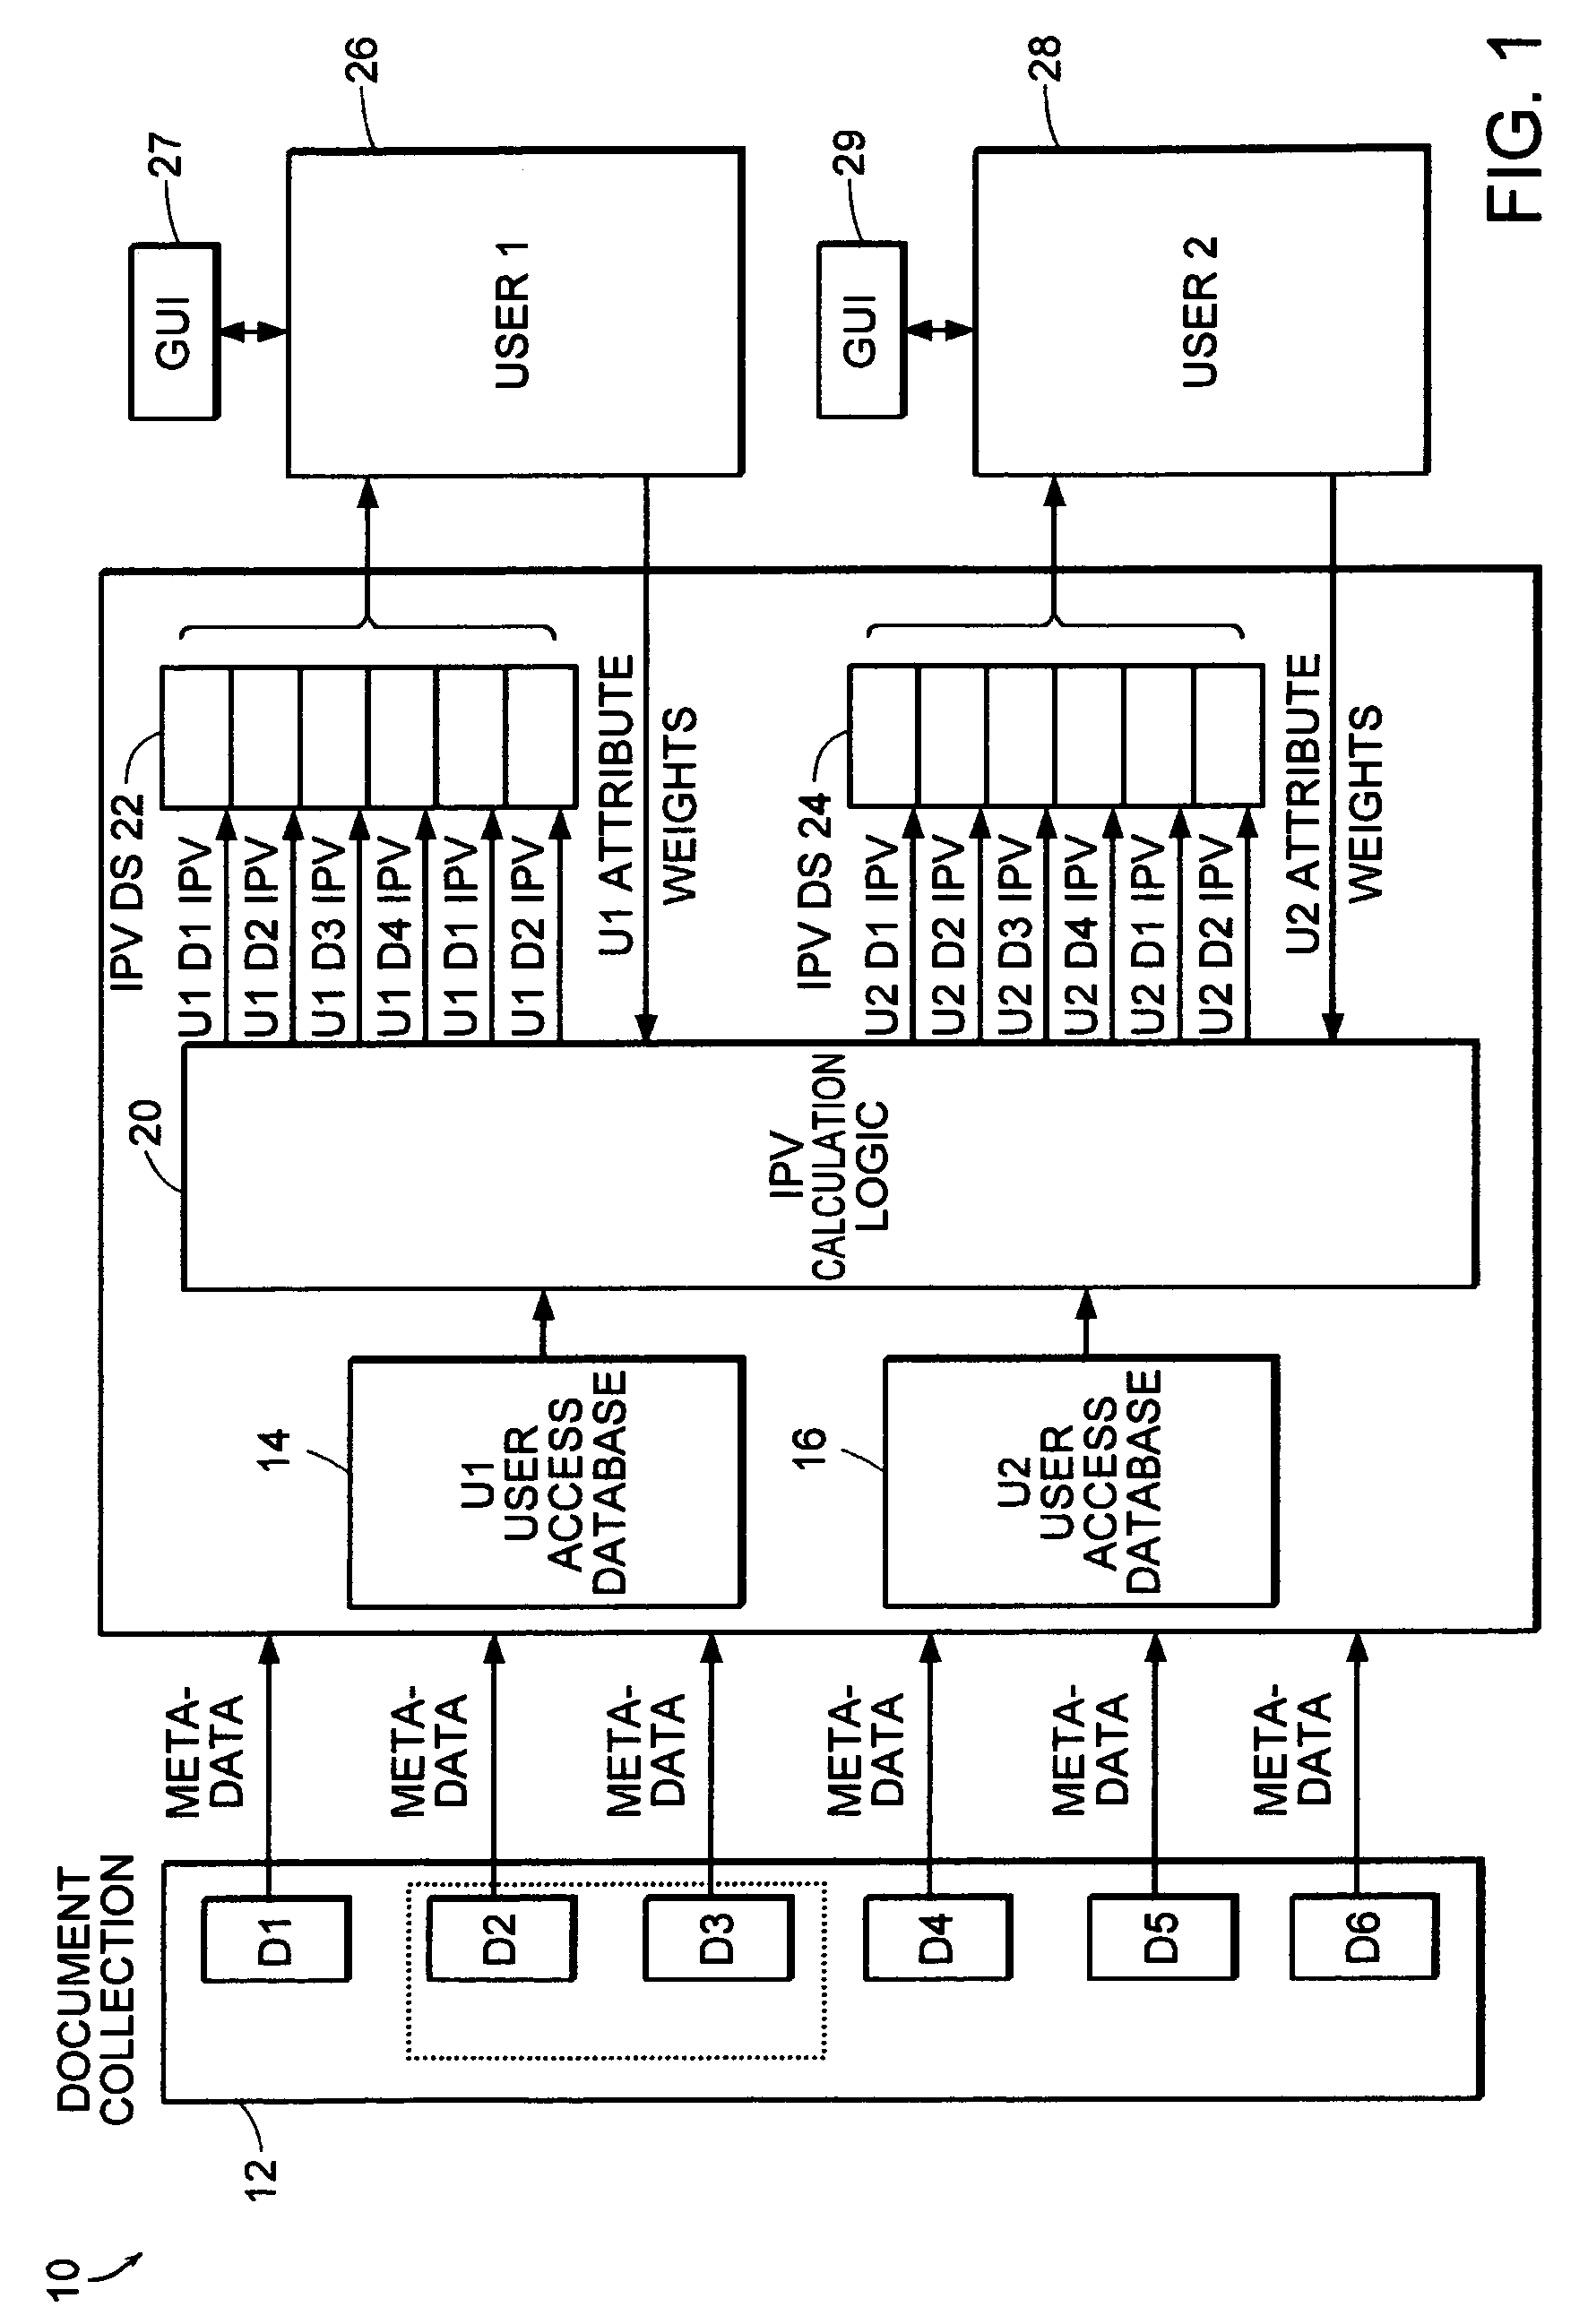 Method and apparatus for representing an interest priority of an object to a user based on personal histories or social context